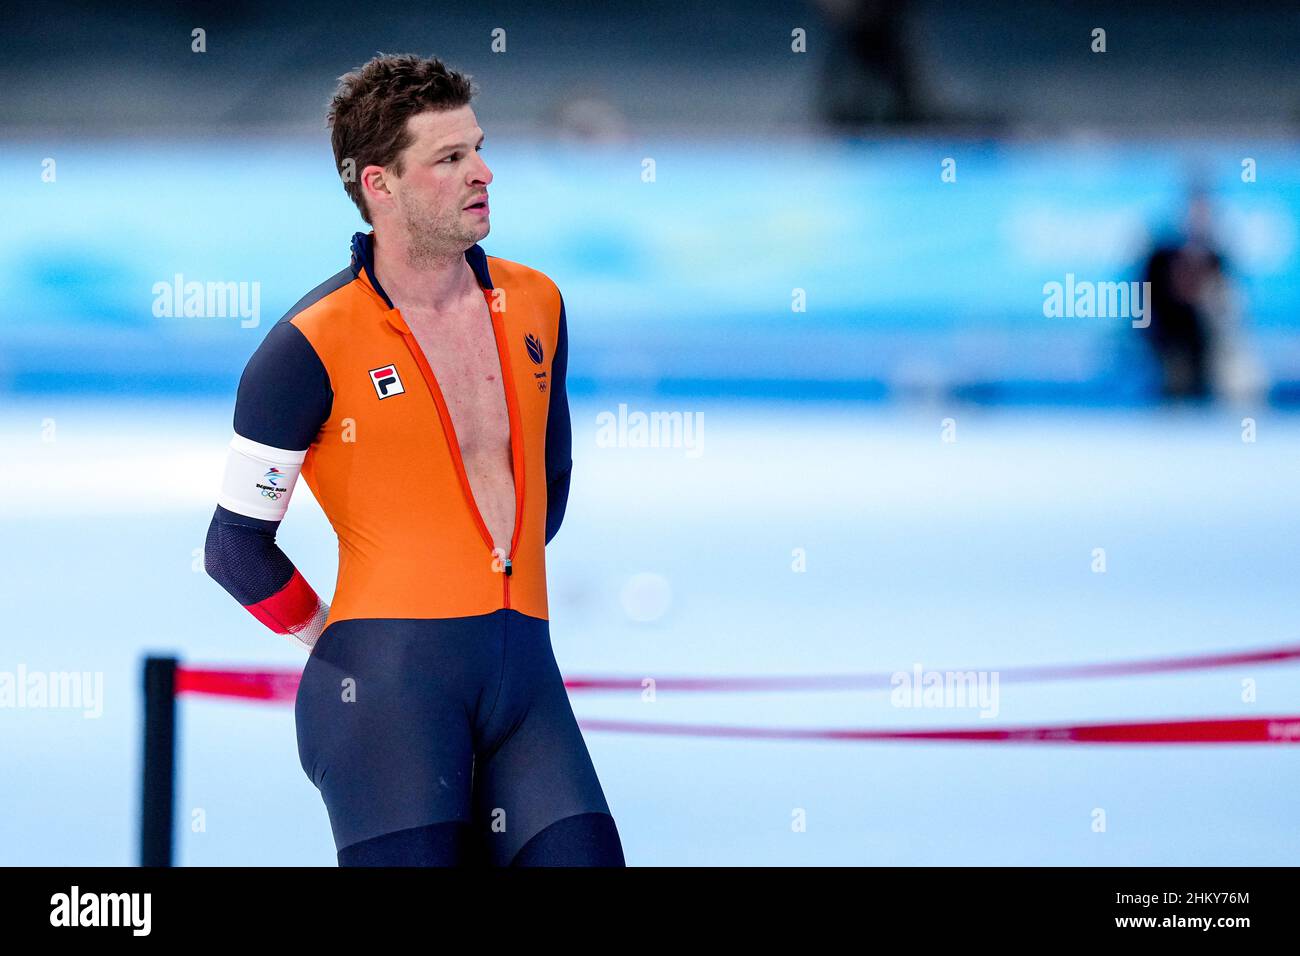 BEIJING, CHINA - FEBRUARY 6: Sven Kramer of the Netherlands competing on the Men's 5000m during the Beijing 2022 Olympic Games at the National Speed Skating Oval on February 6, 2022 in Beijing, China (Photo by Douwe Bijlsma/Orange Pictures) NOCNSF House of Sports Stock Photo